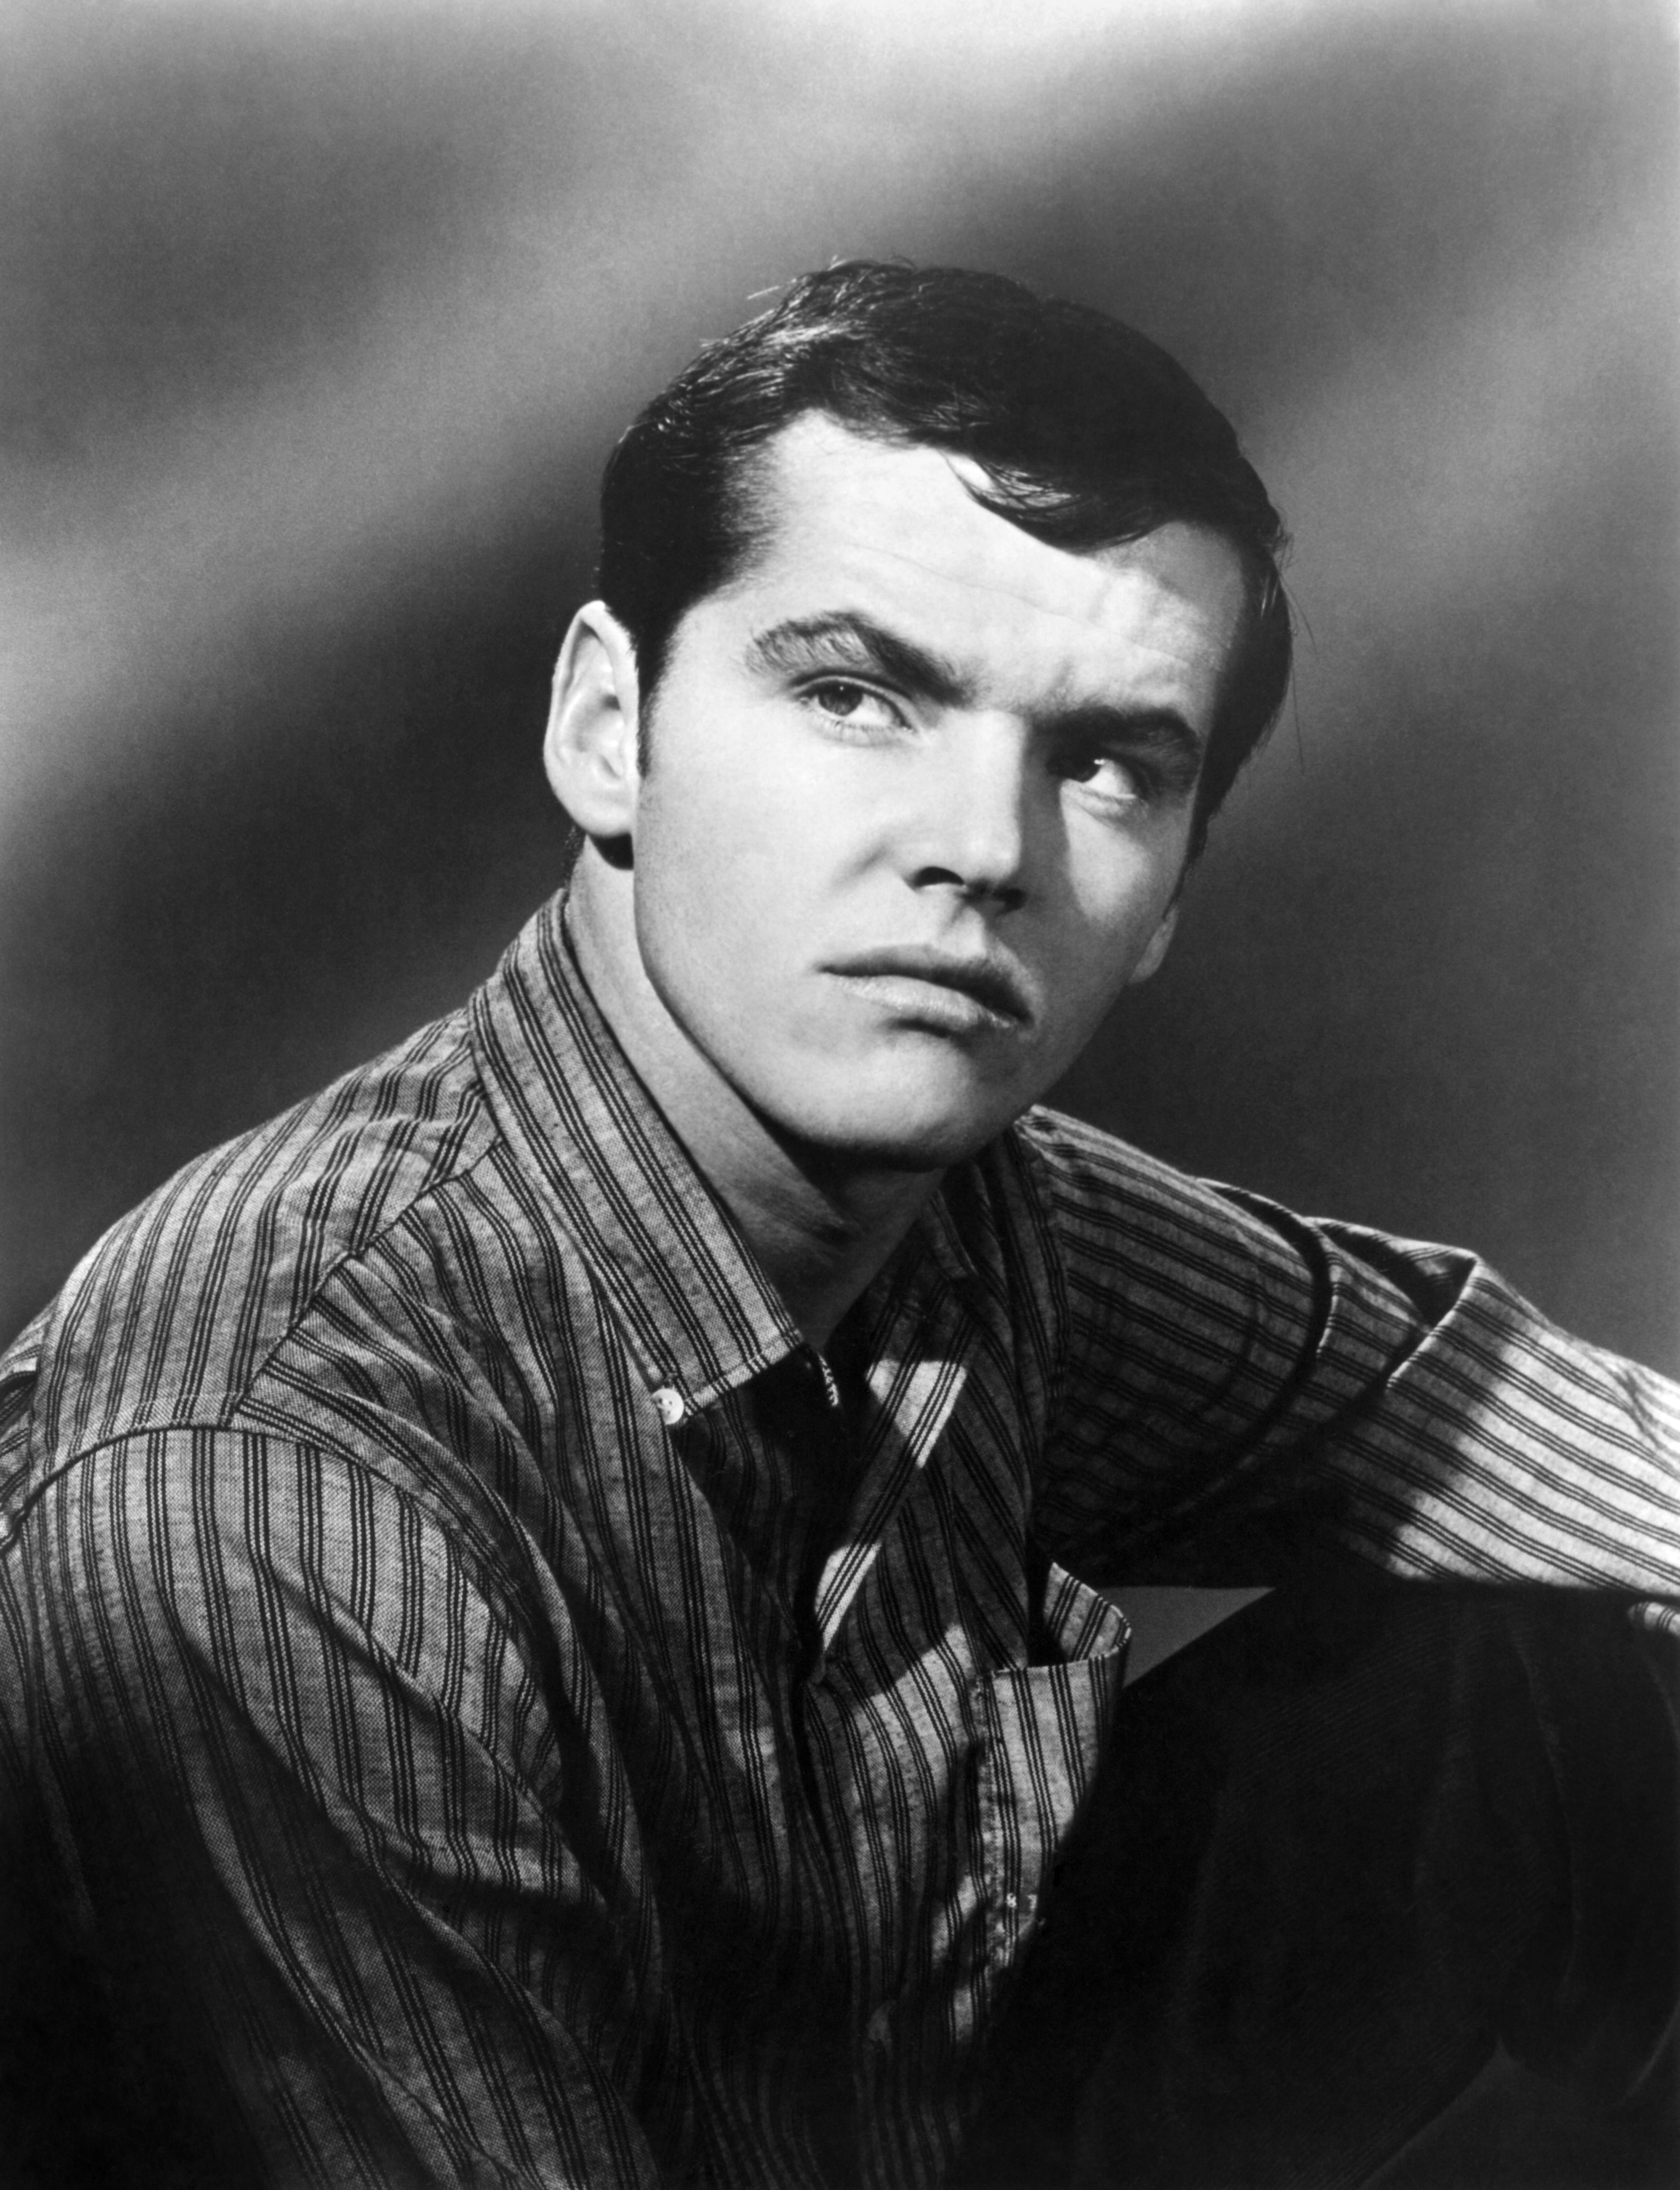 In a black-and-white headshot, wearing a striped shirt